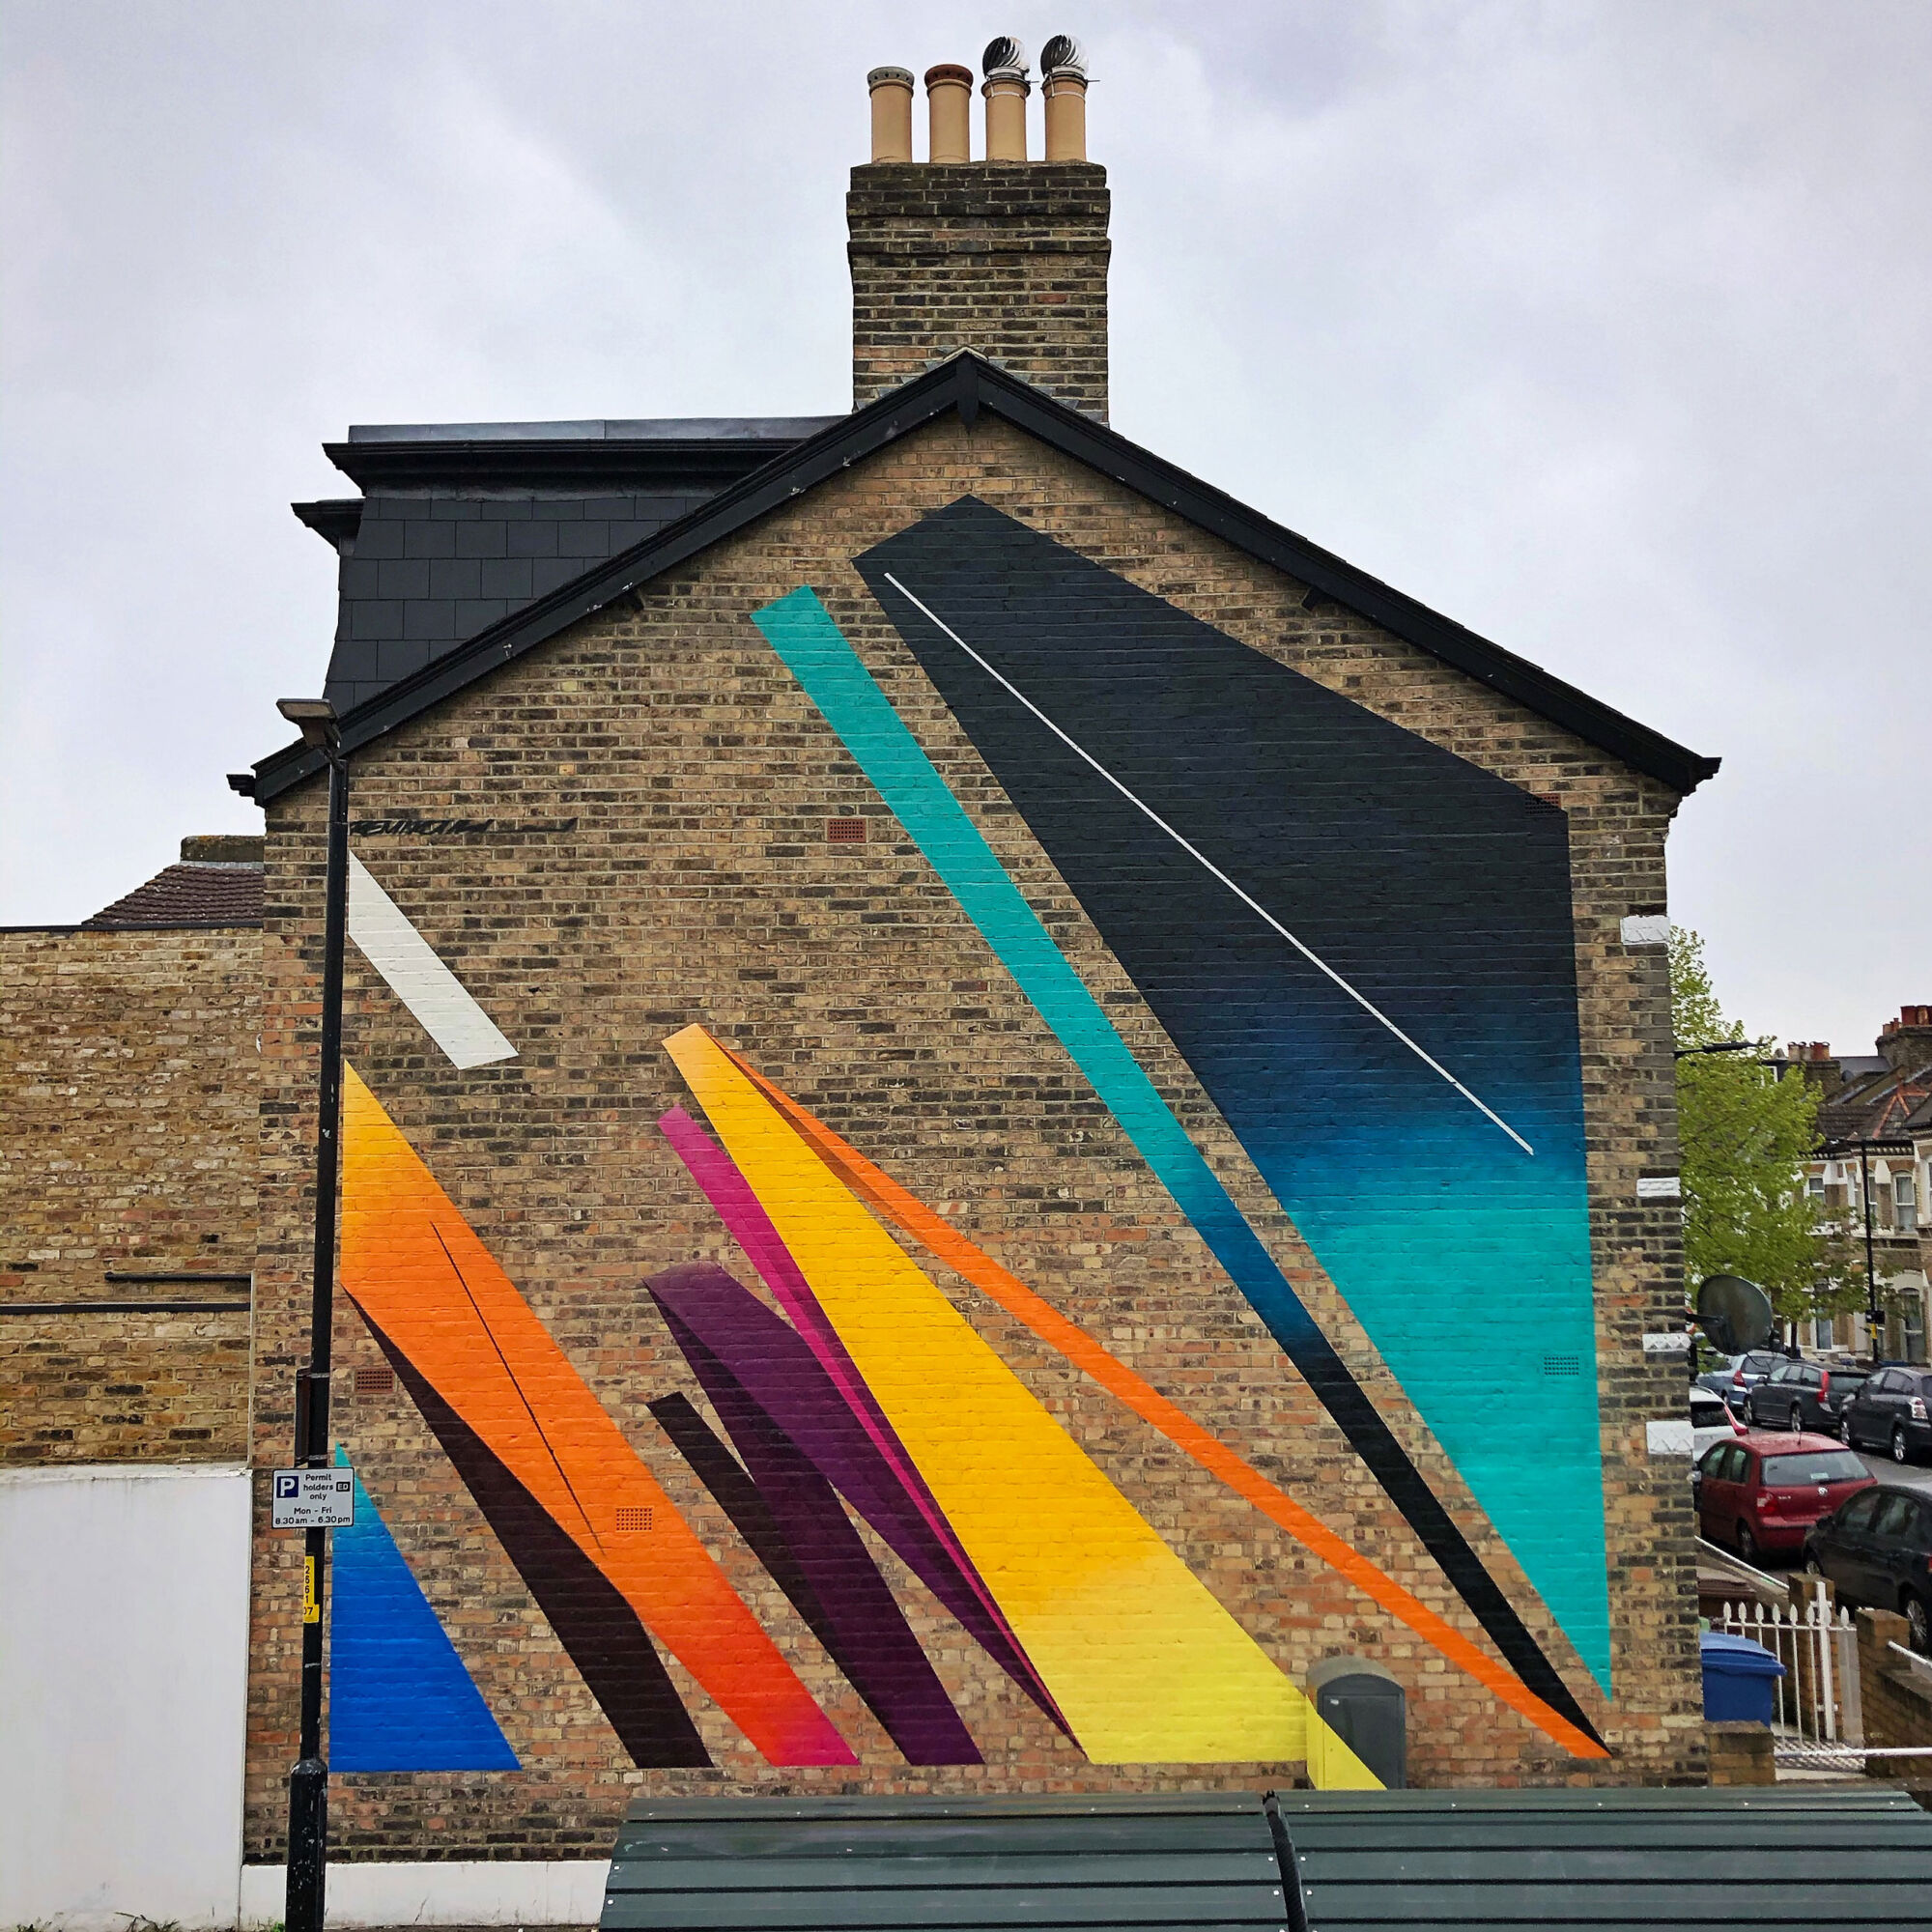 The Wick - Remi Rough, 2021
East Dulwich mural